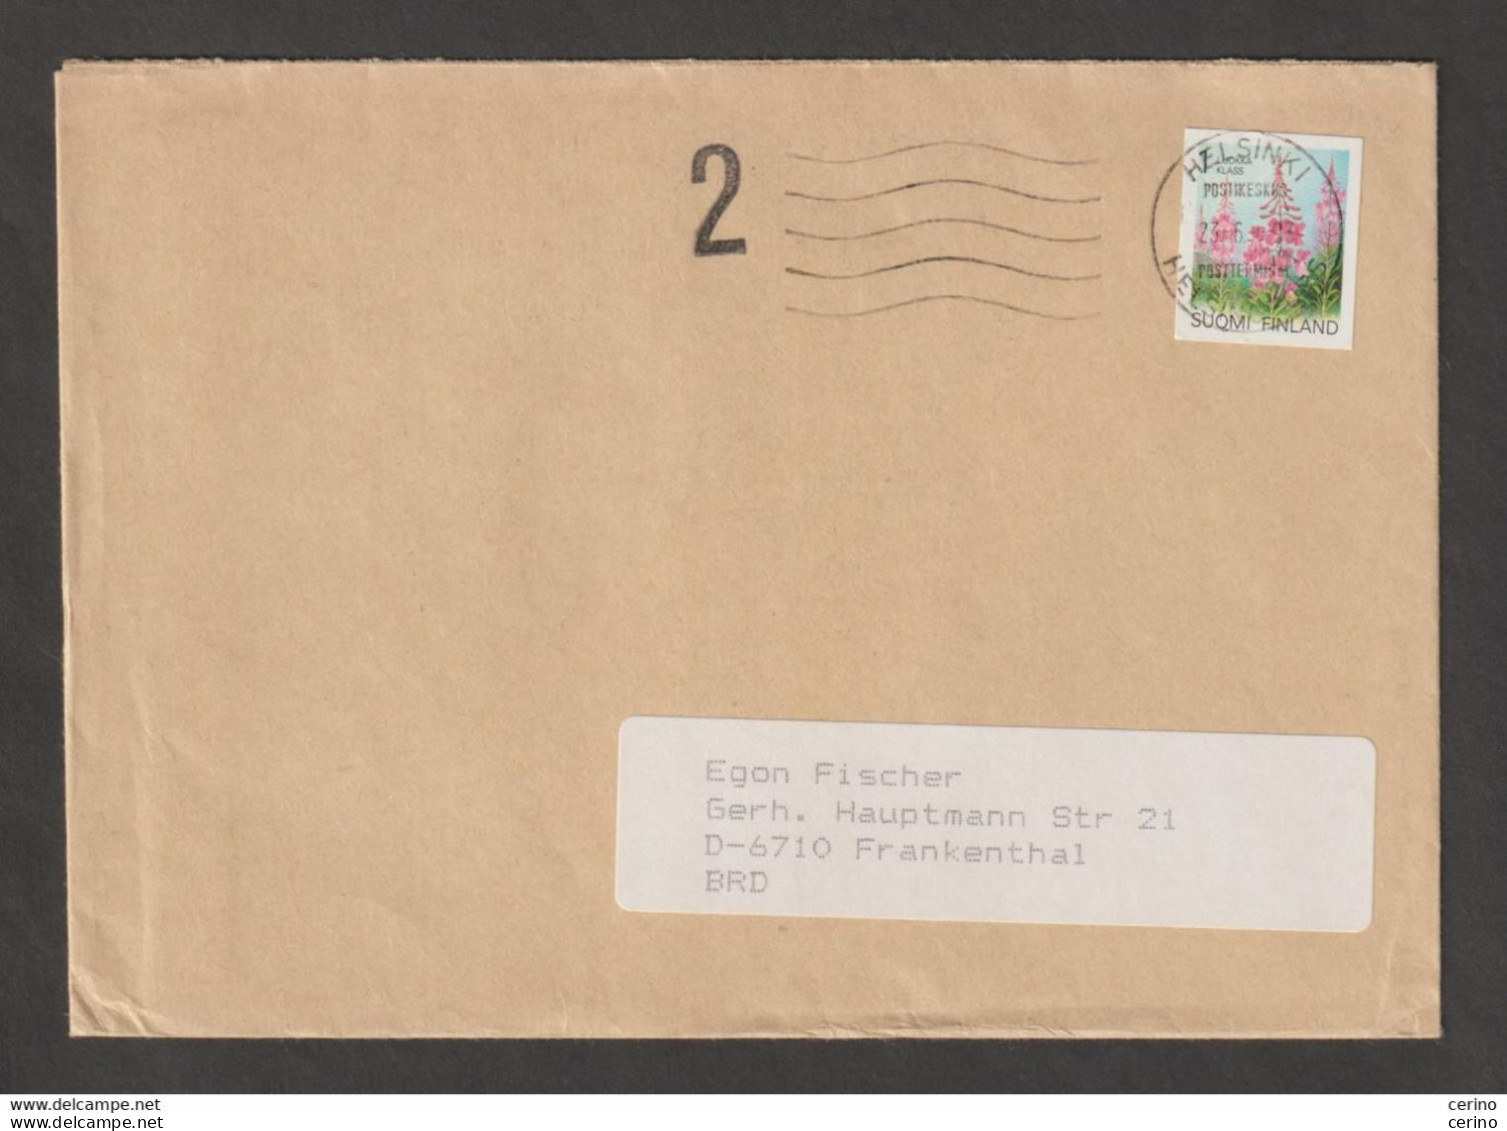 FINLAND:  1993  COVER   WITH  SELF- ADHESIVE  2 M.10 (1155) -  TO  GERMANY - Lettres & Documents